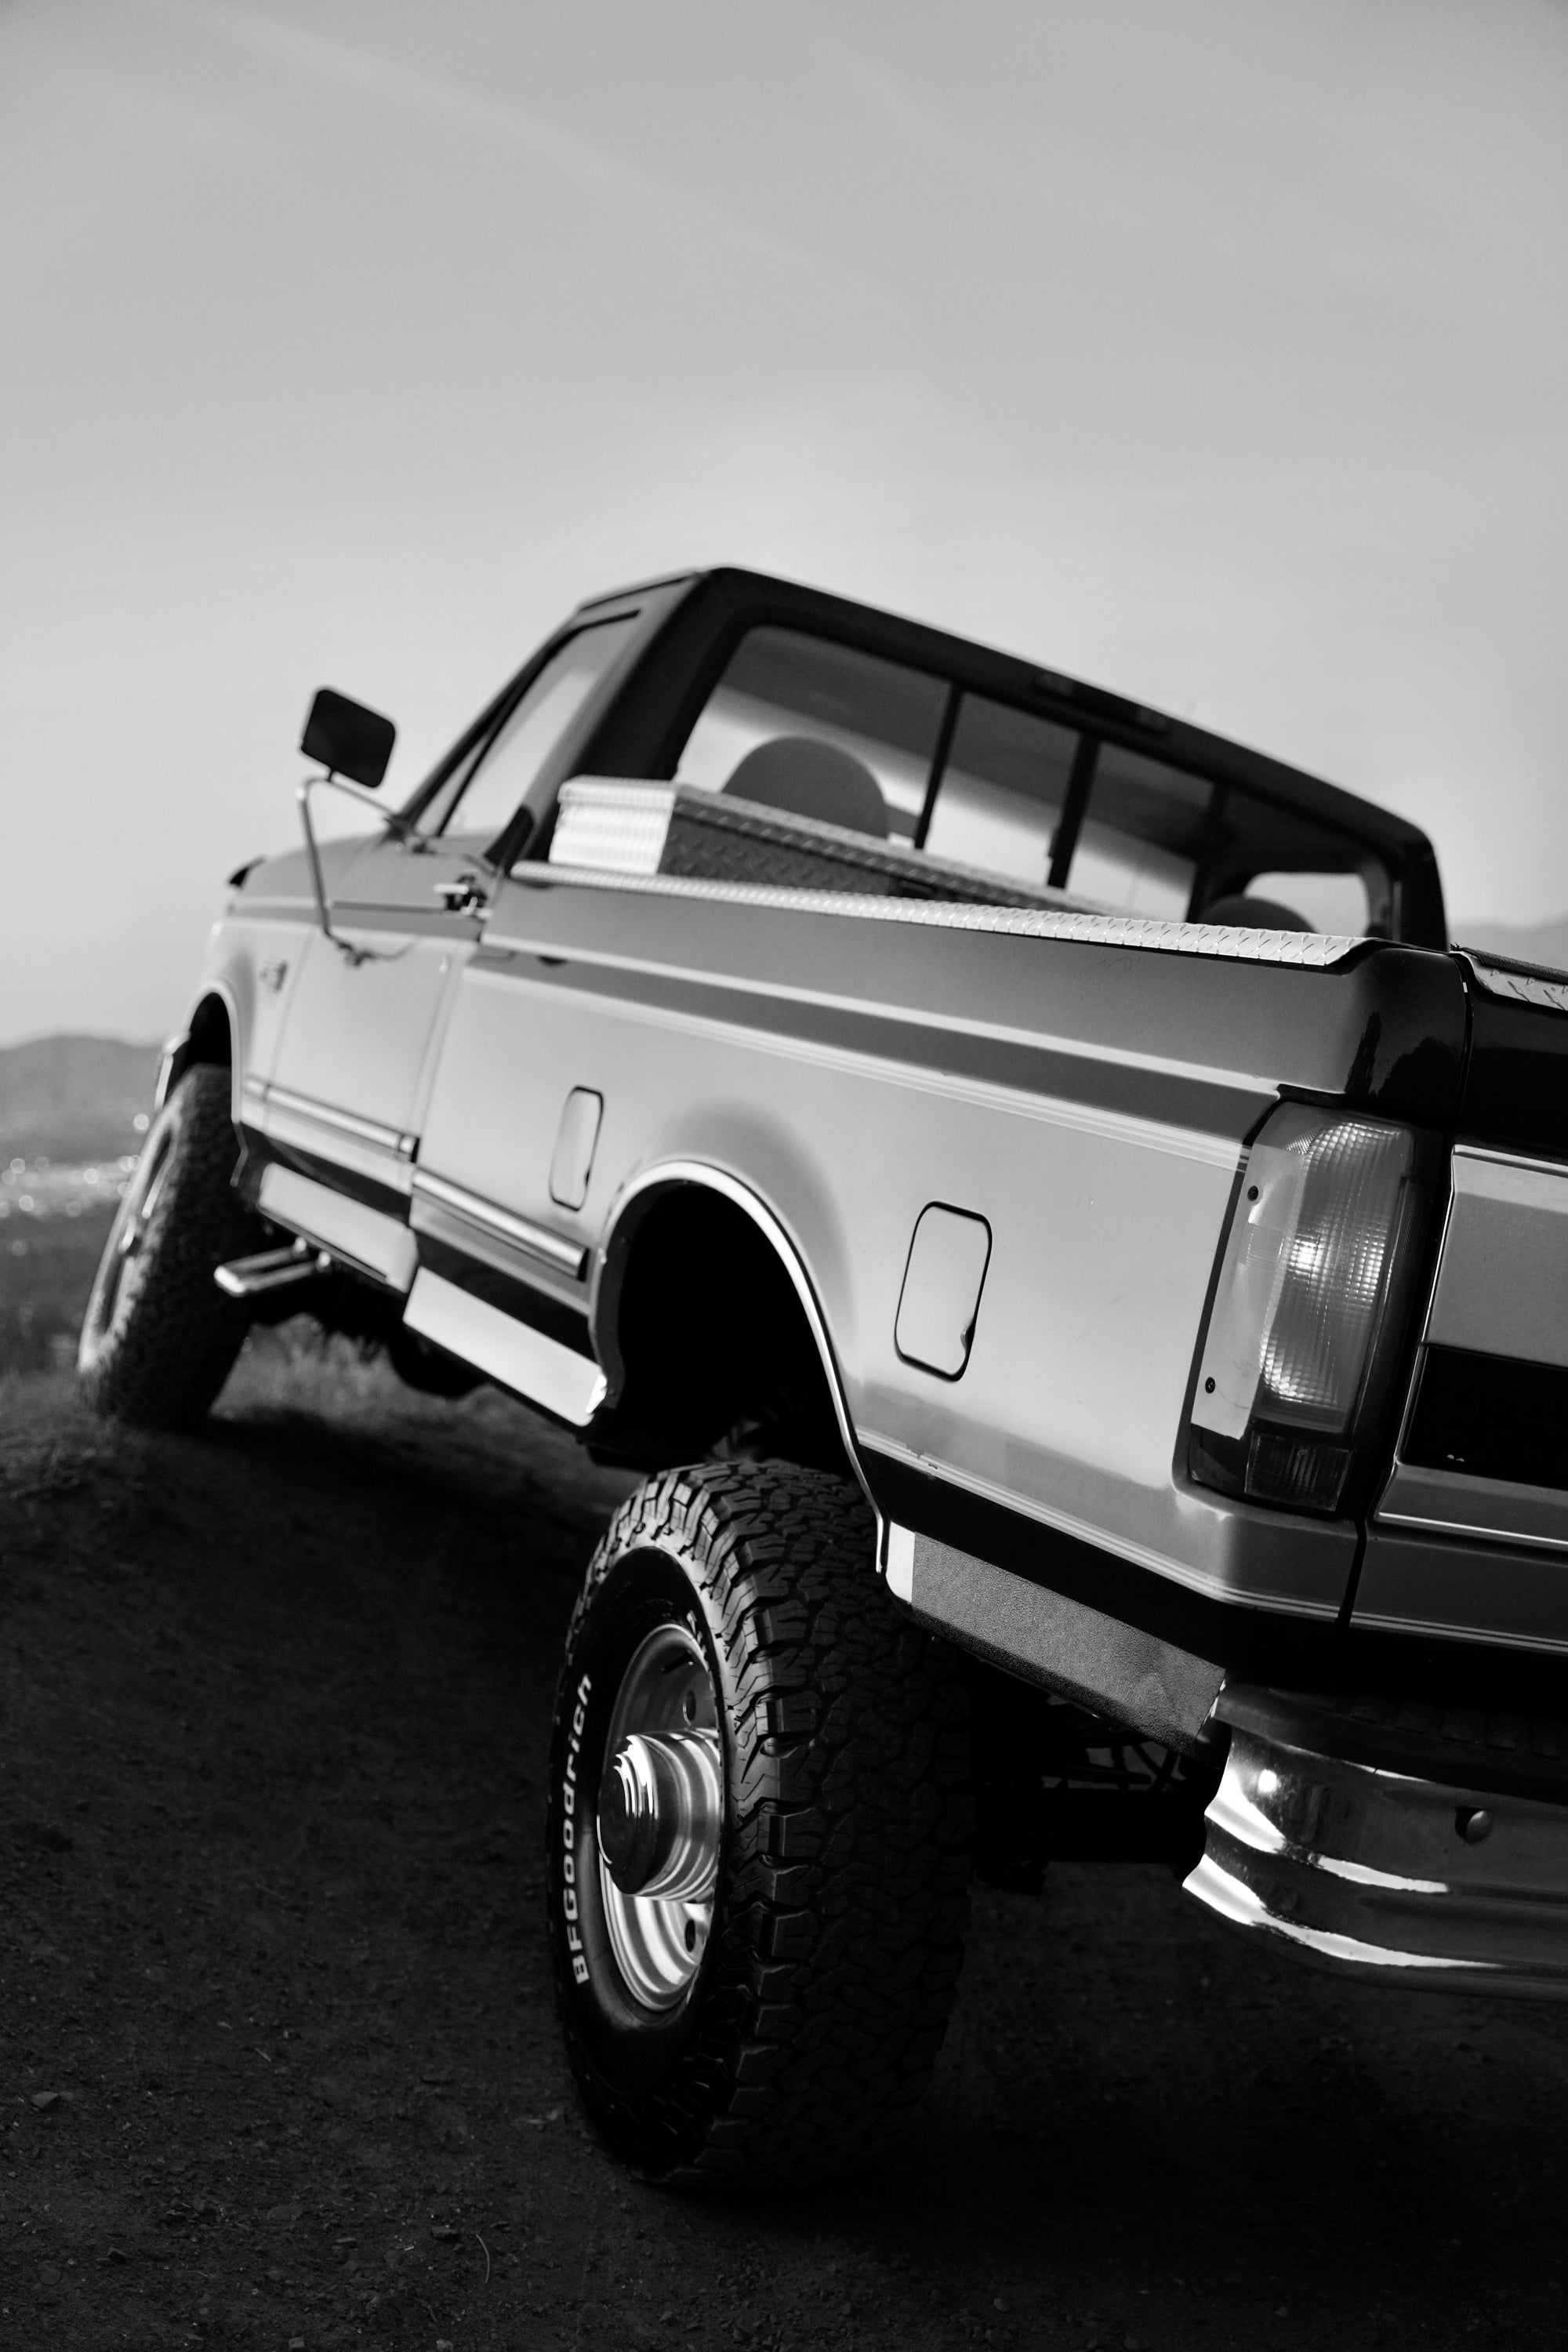 1996 Ford F-250 4x4